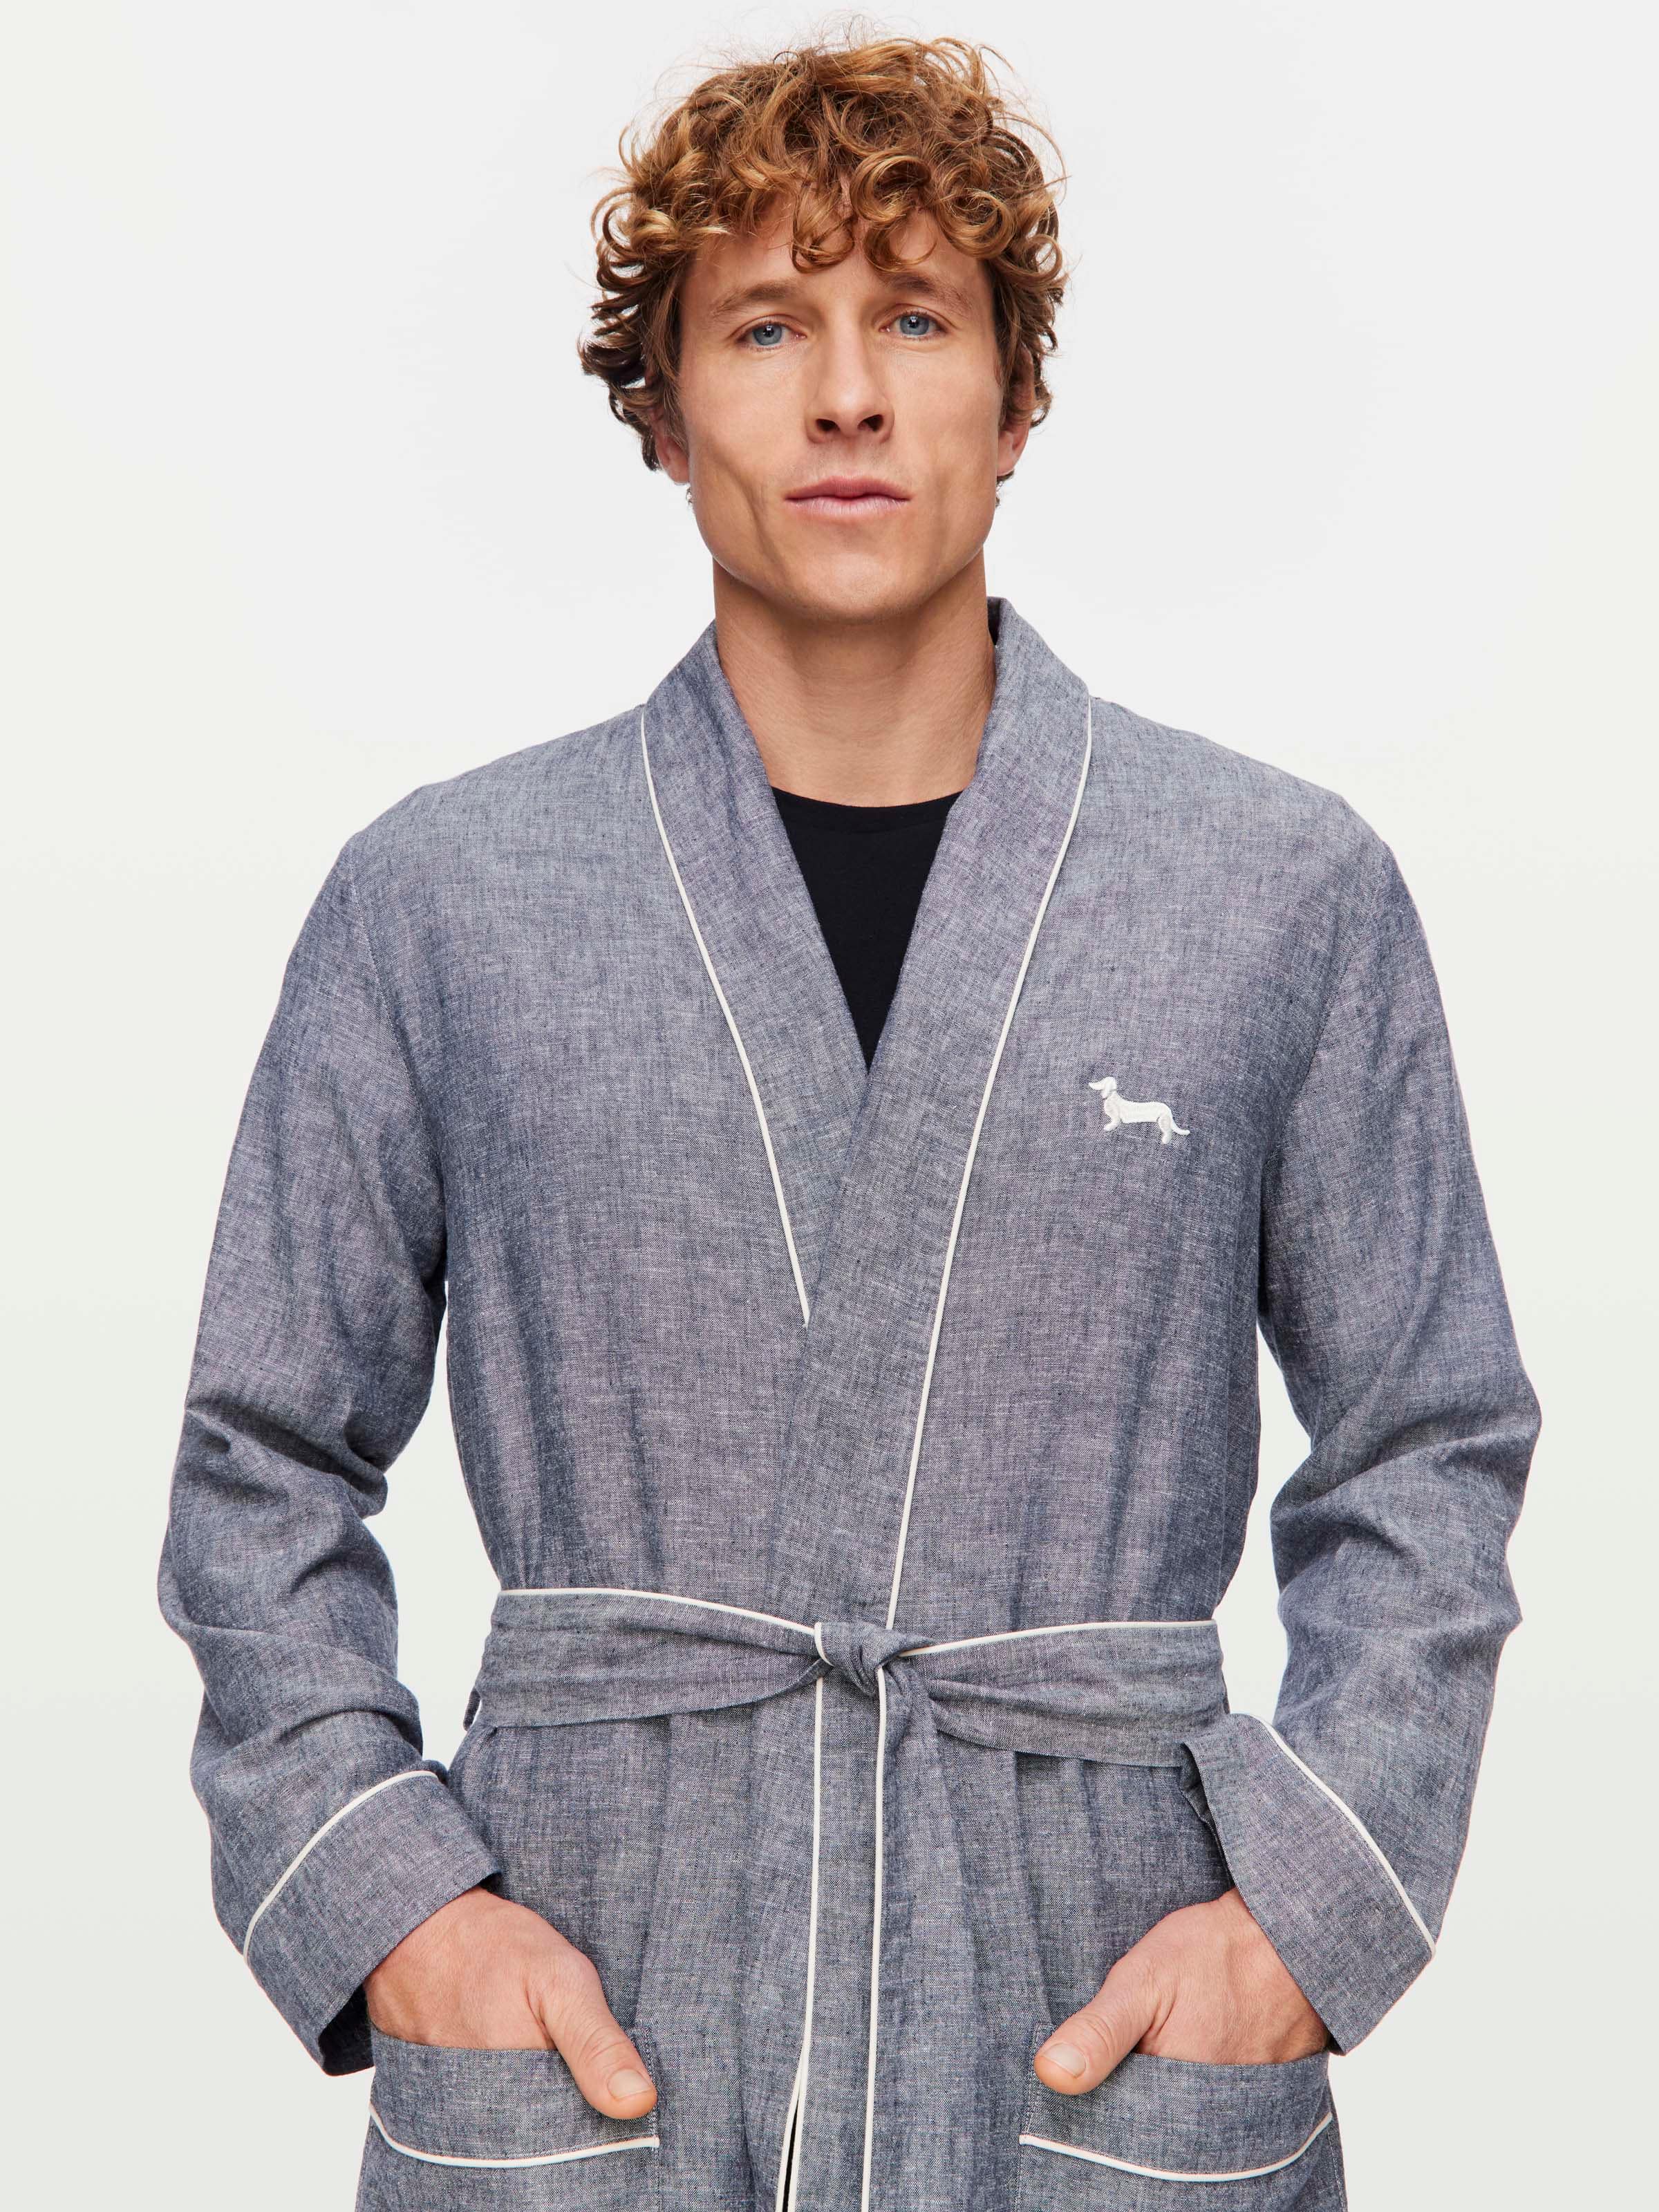 Gents Dressing Gown - Gifts - Barbours